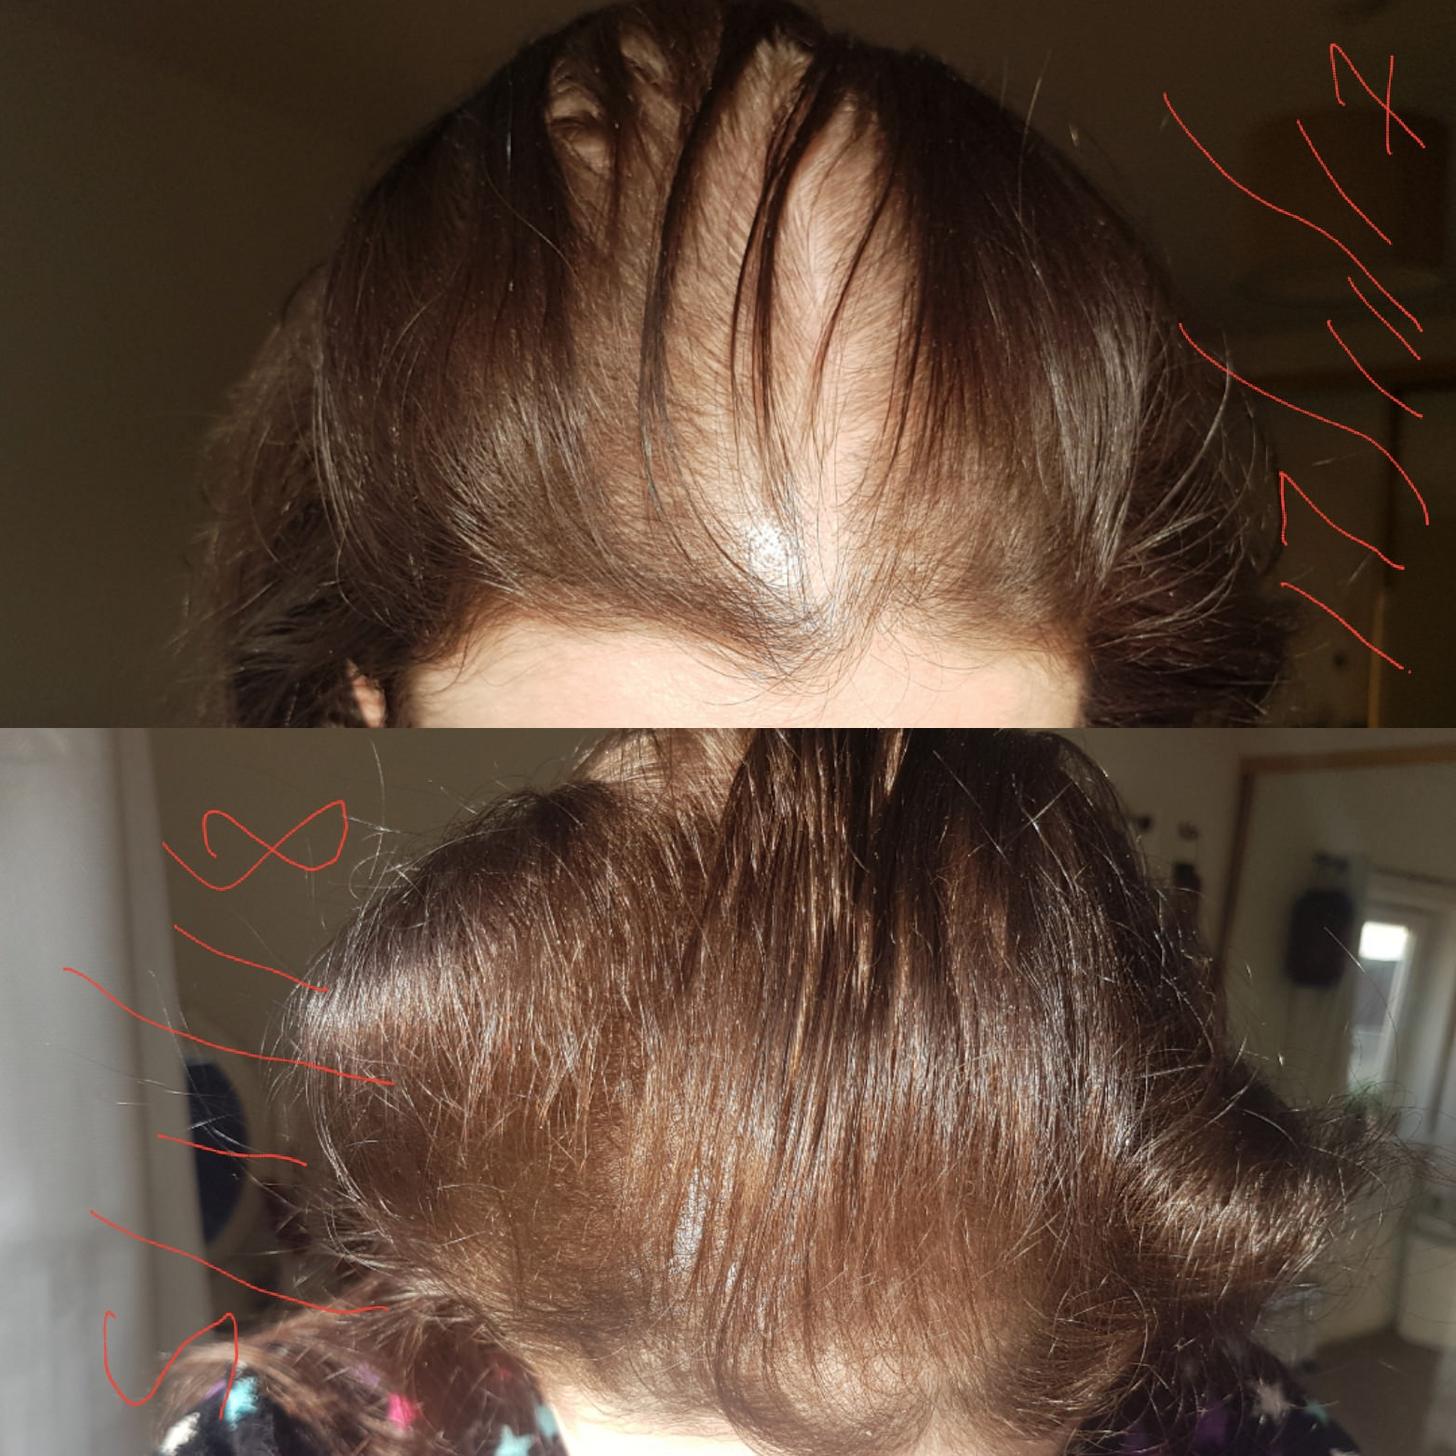 Product One Woman's Hair Back in Just a Month and a Half NewBeauty